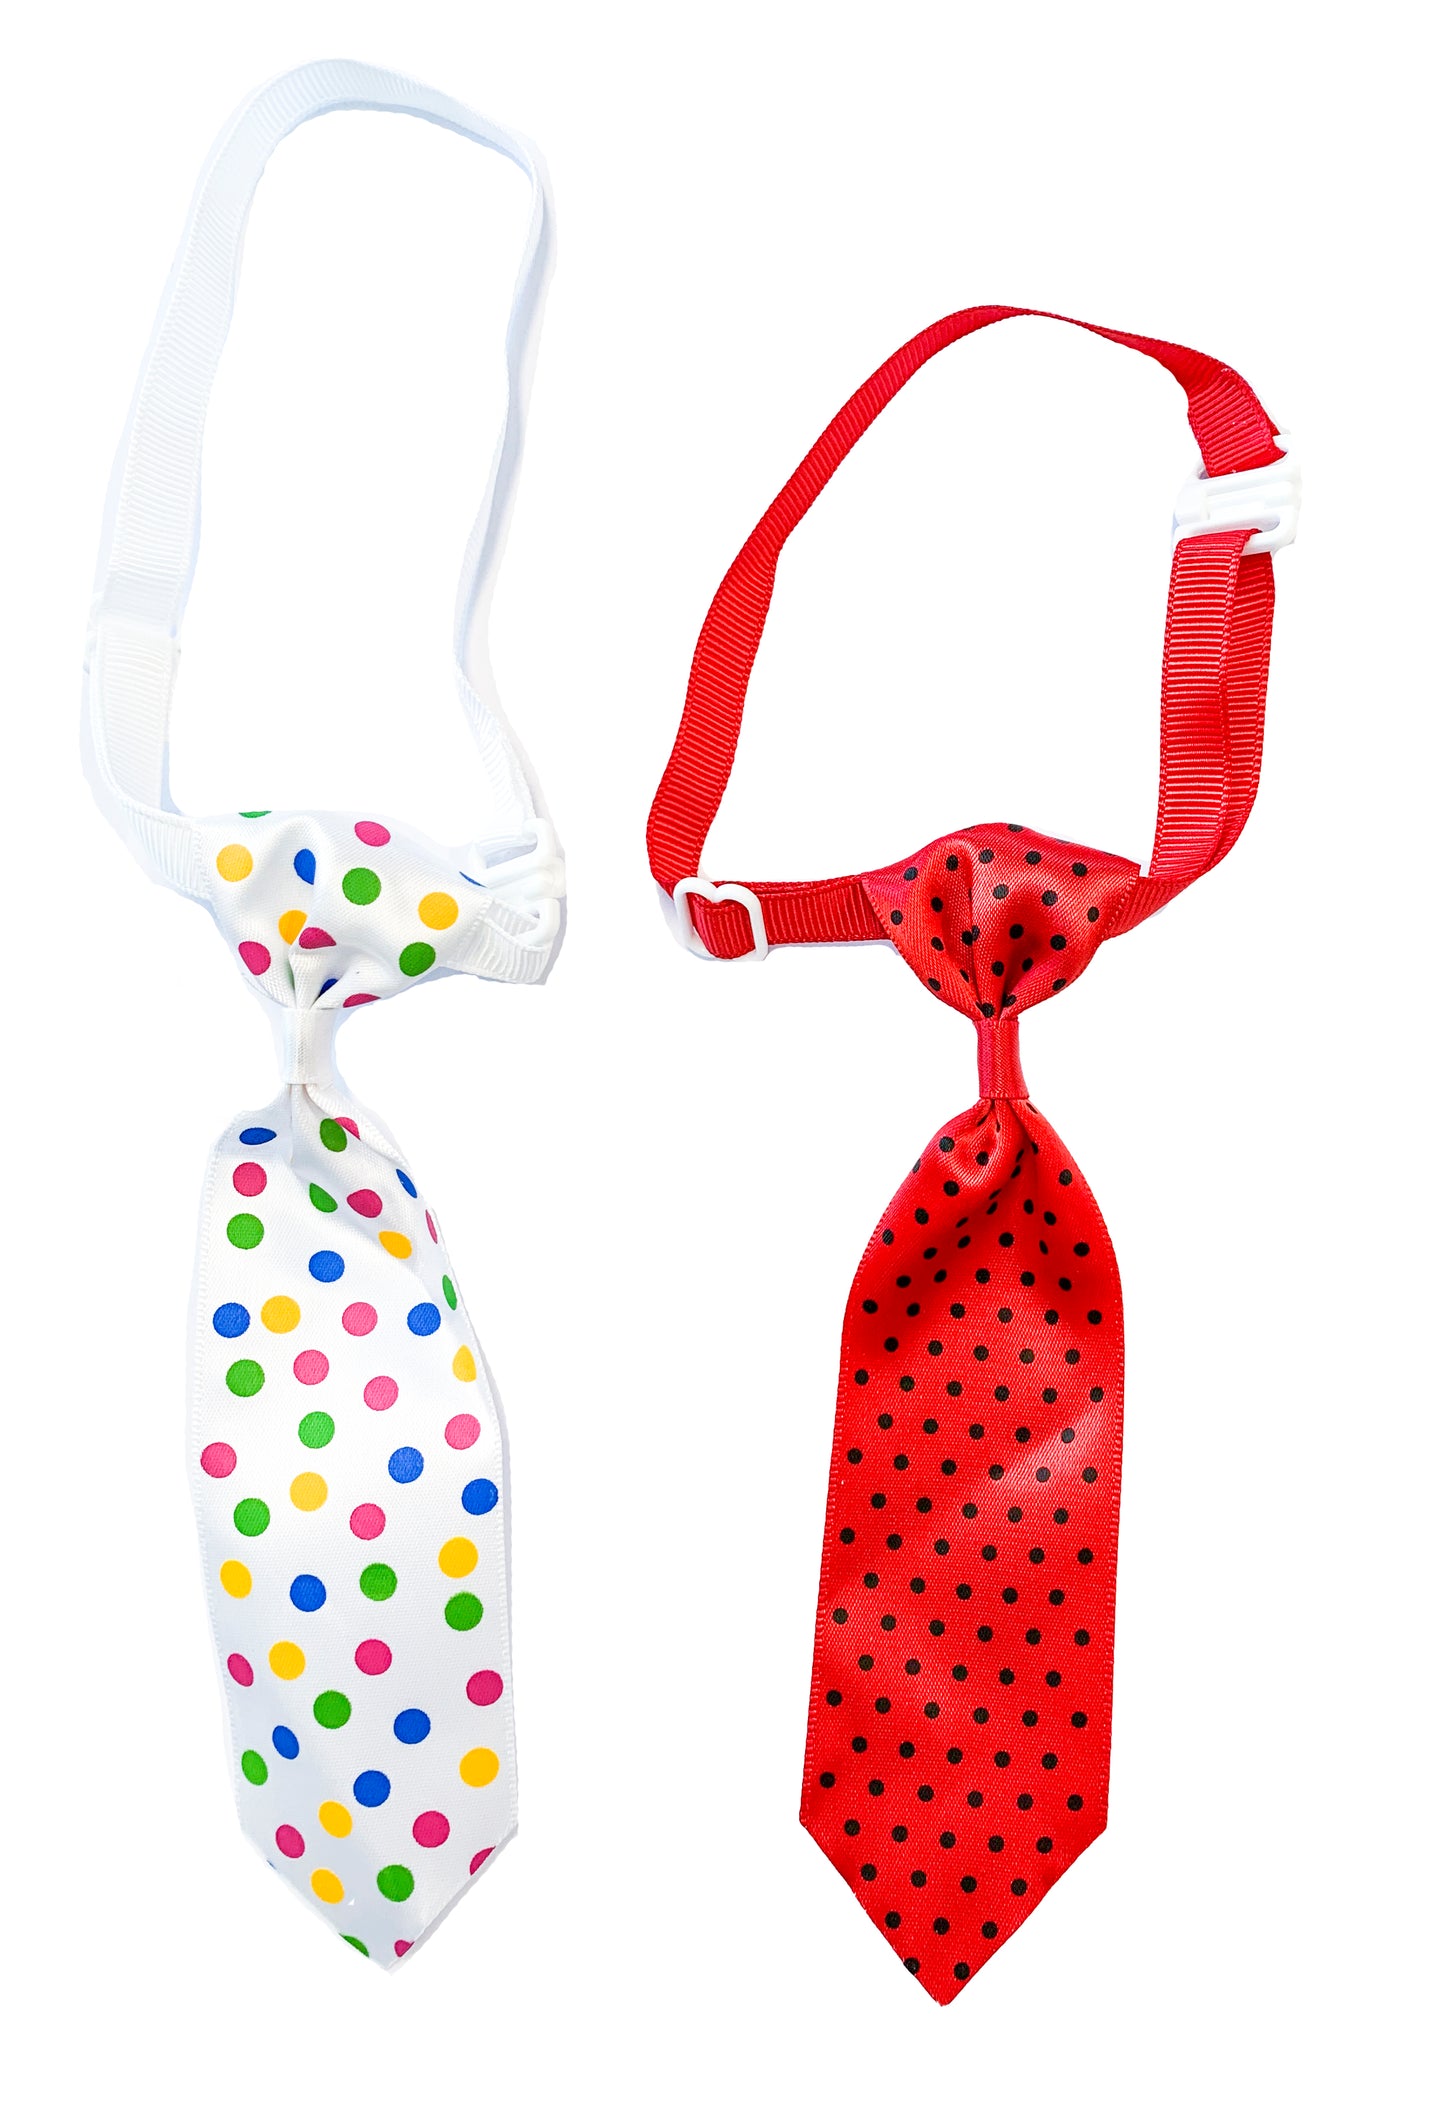 Doggy Tie with Polka Dots – 10 Pack